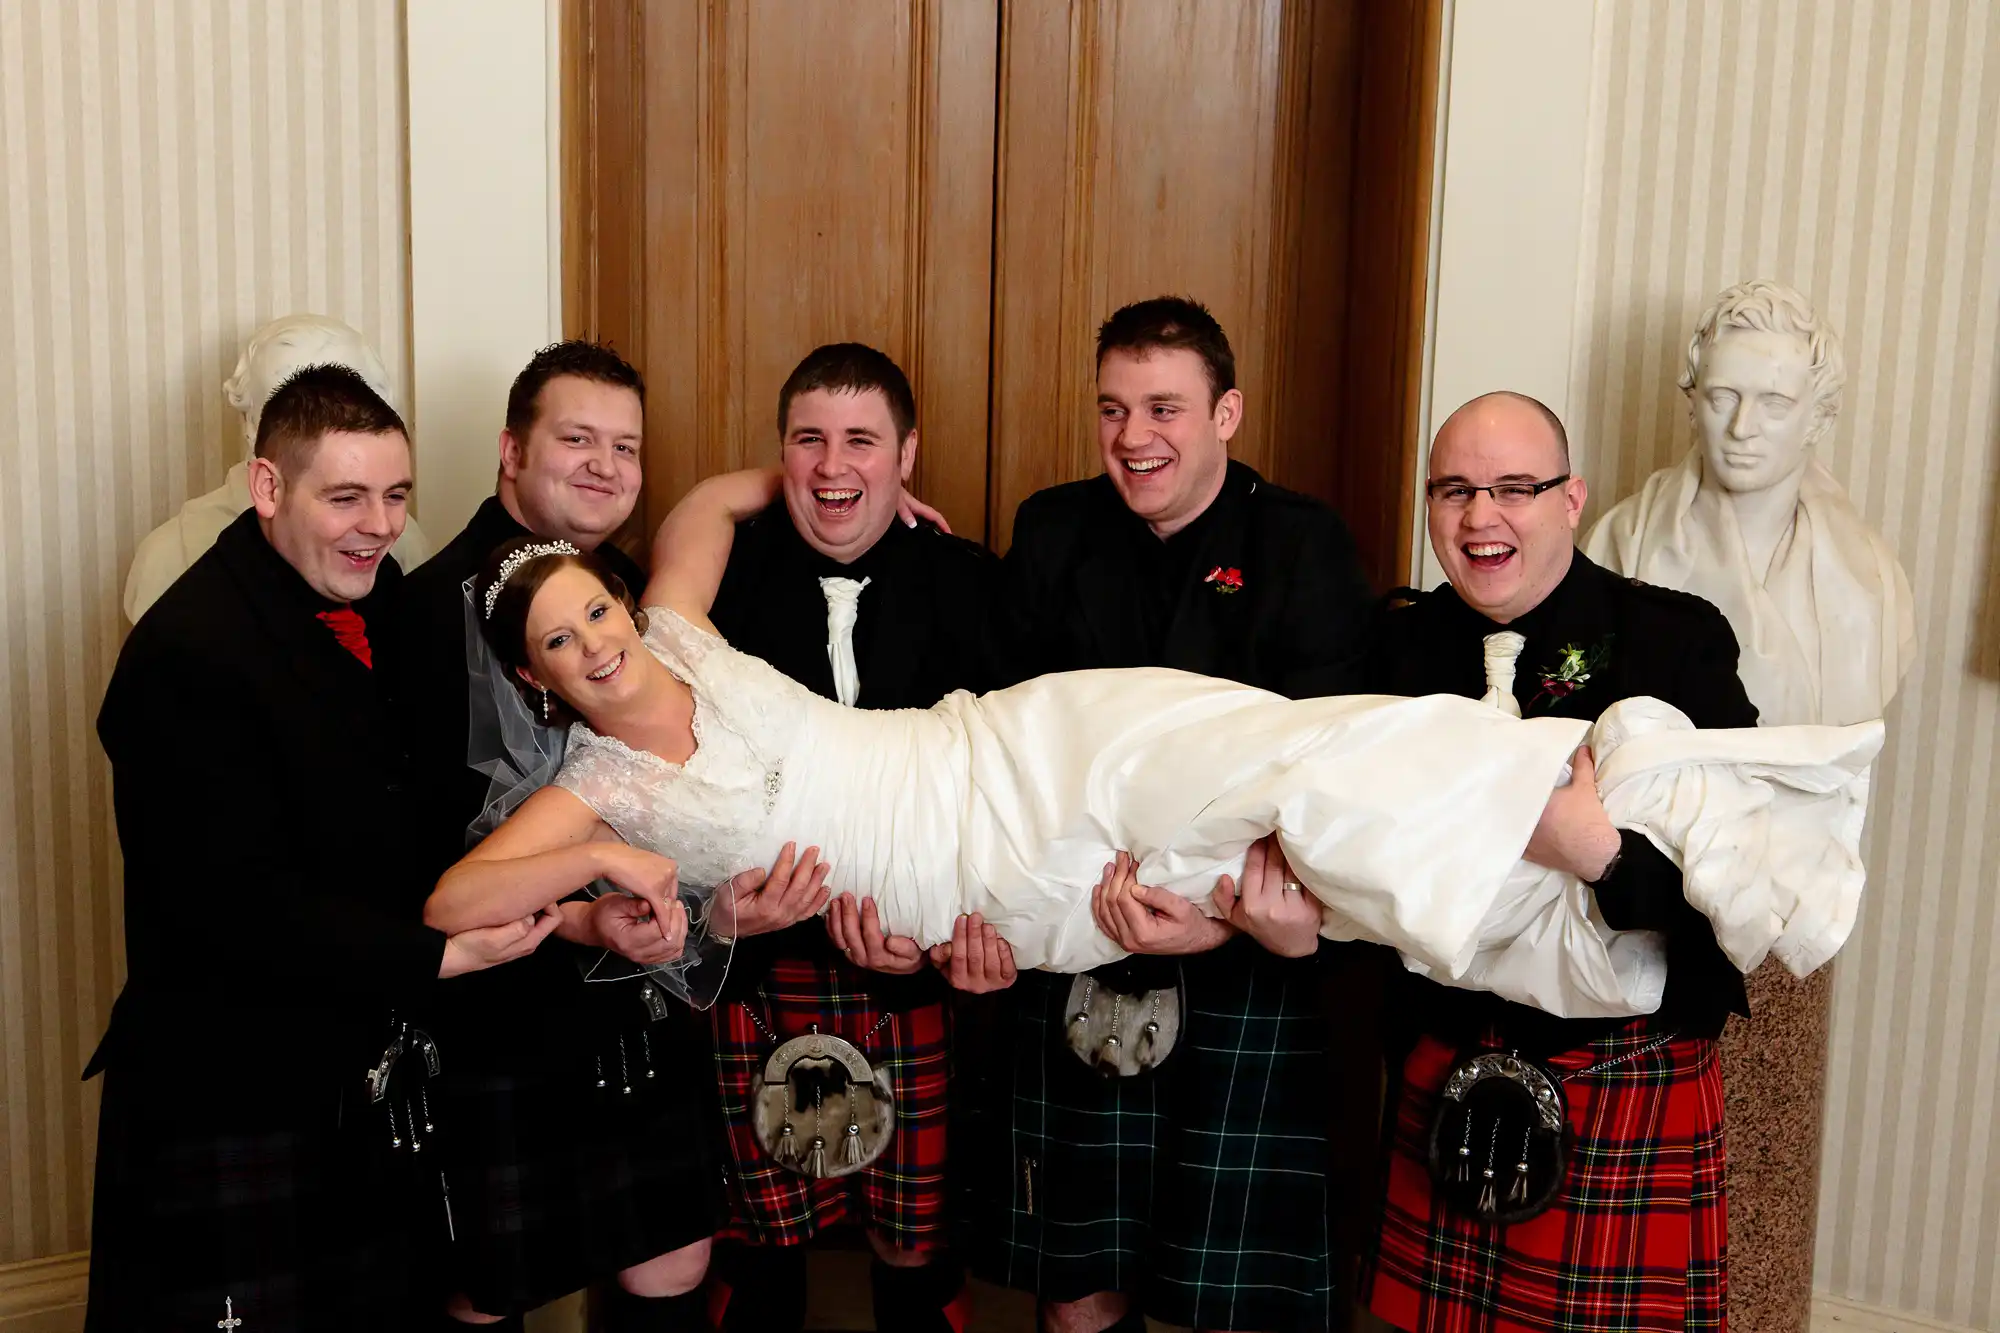 A bride in a white dress is playfully held horizontally by five men in kilts and formal jackets, all smiling in a room with wooden paneling and a bust sculpture.